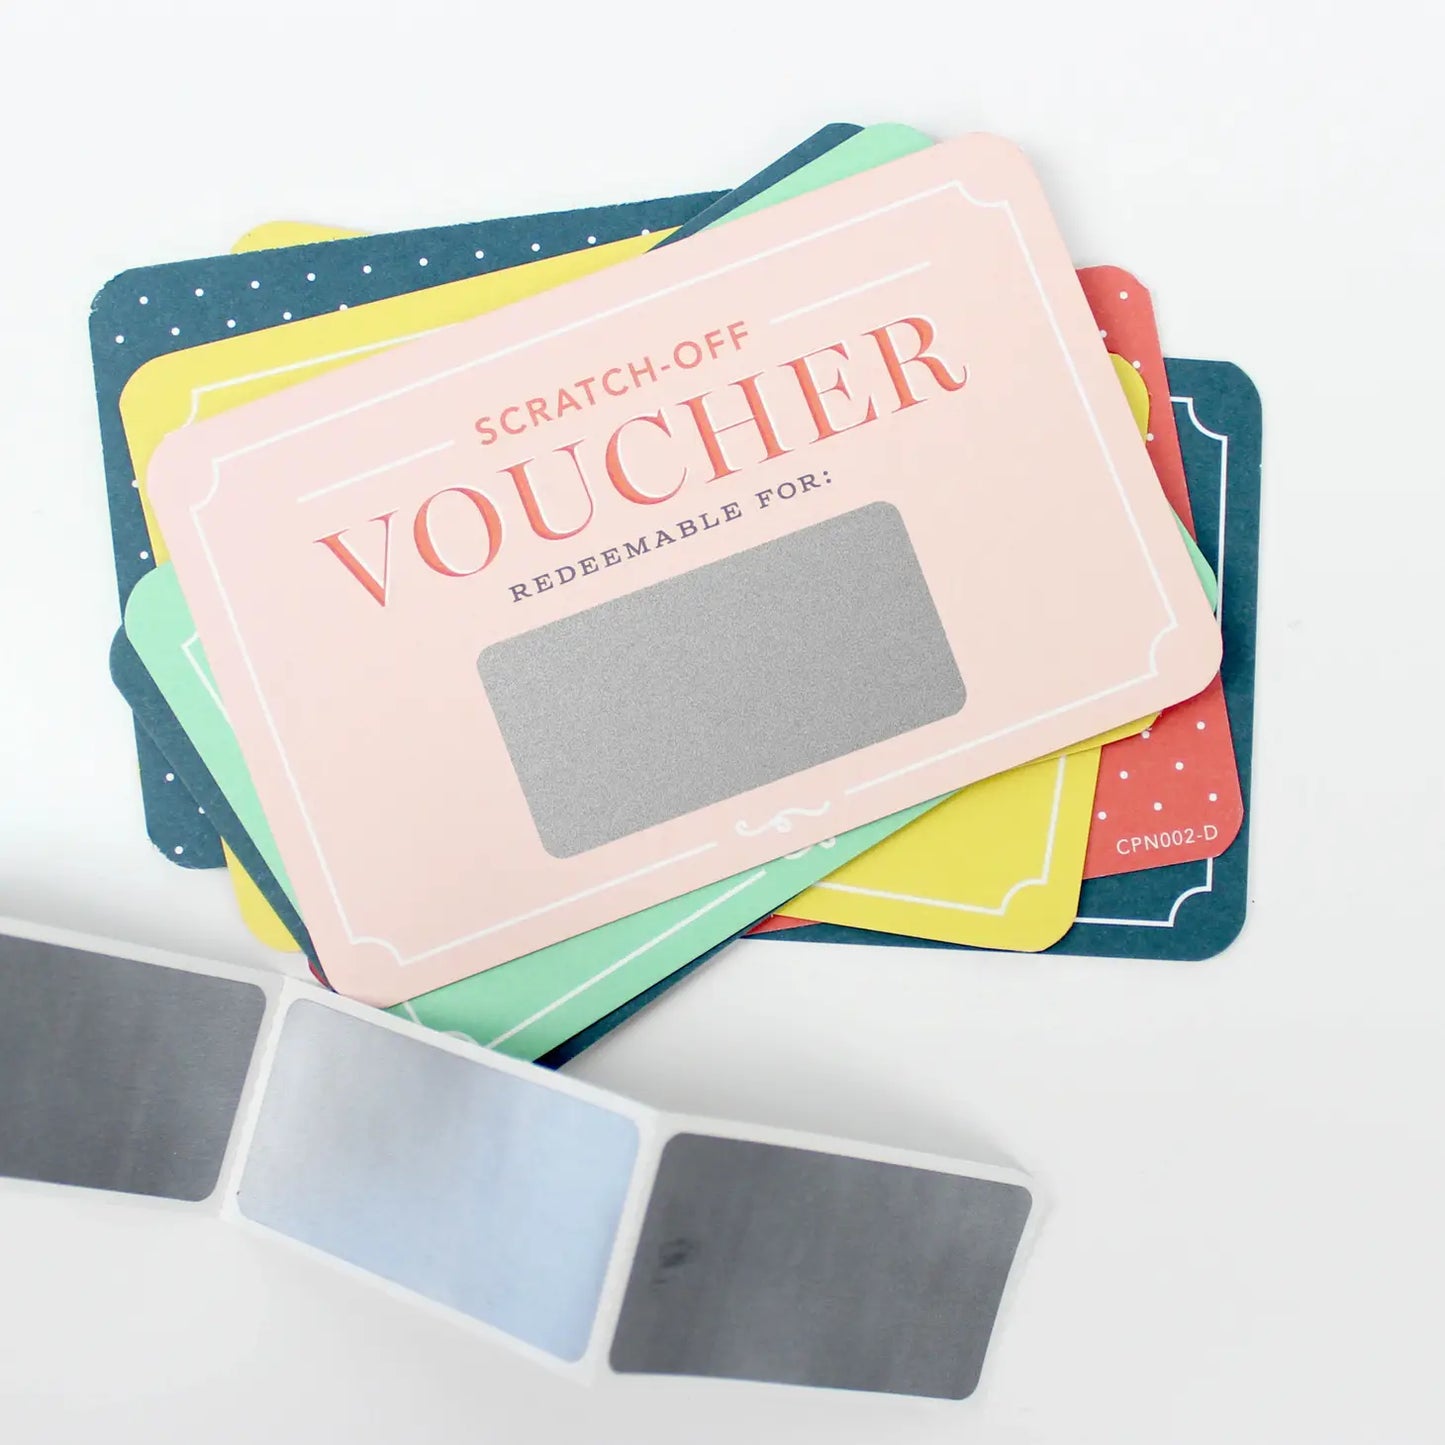 Scratch-off Vouchers For Any Occasion - 12 pk